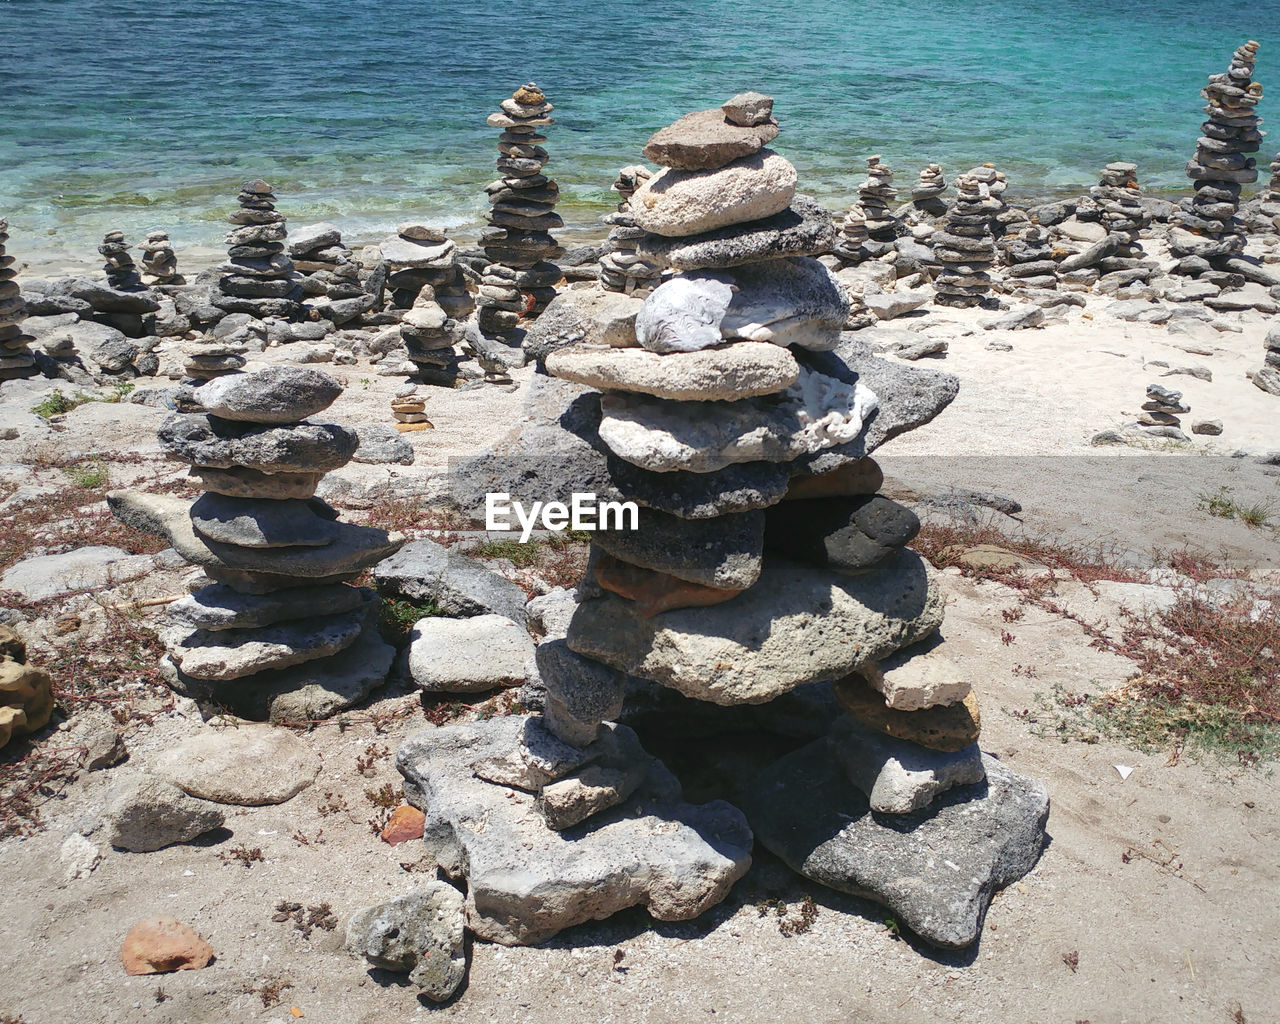 water, rock, beach, sea, balance, land, nature, zen-like, stone, day, tranquility, shore, sunlight, coast, beauty in nature, pebble, no people, tranquil scene, high angle view, outdoors, sand, scenics - nature, large group of objects, geology